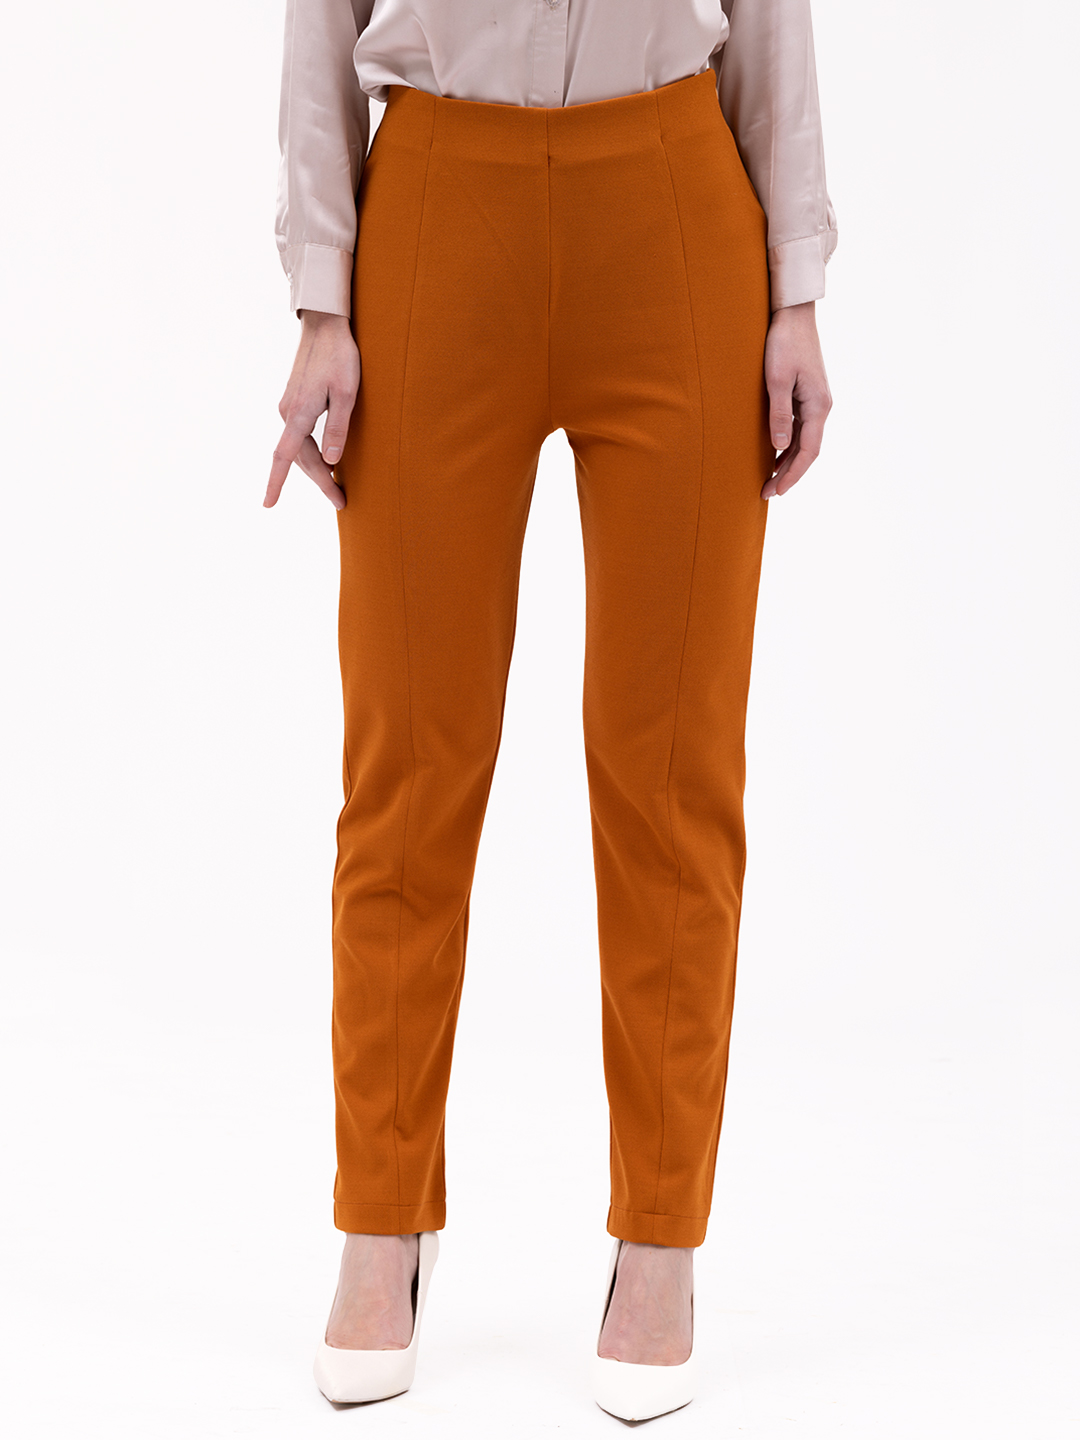 Formal Windsor Tan Trousers - Front